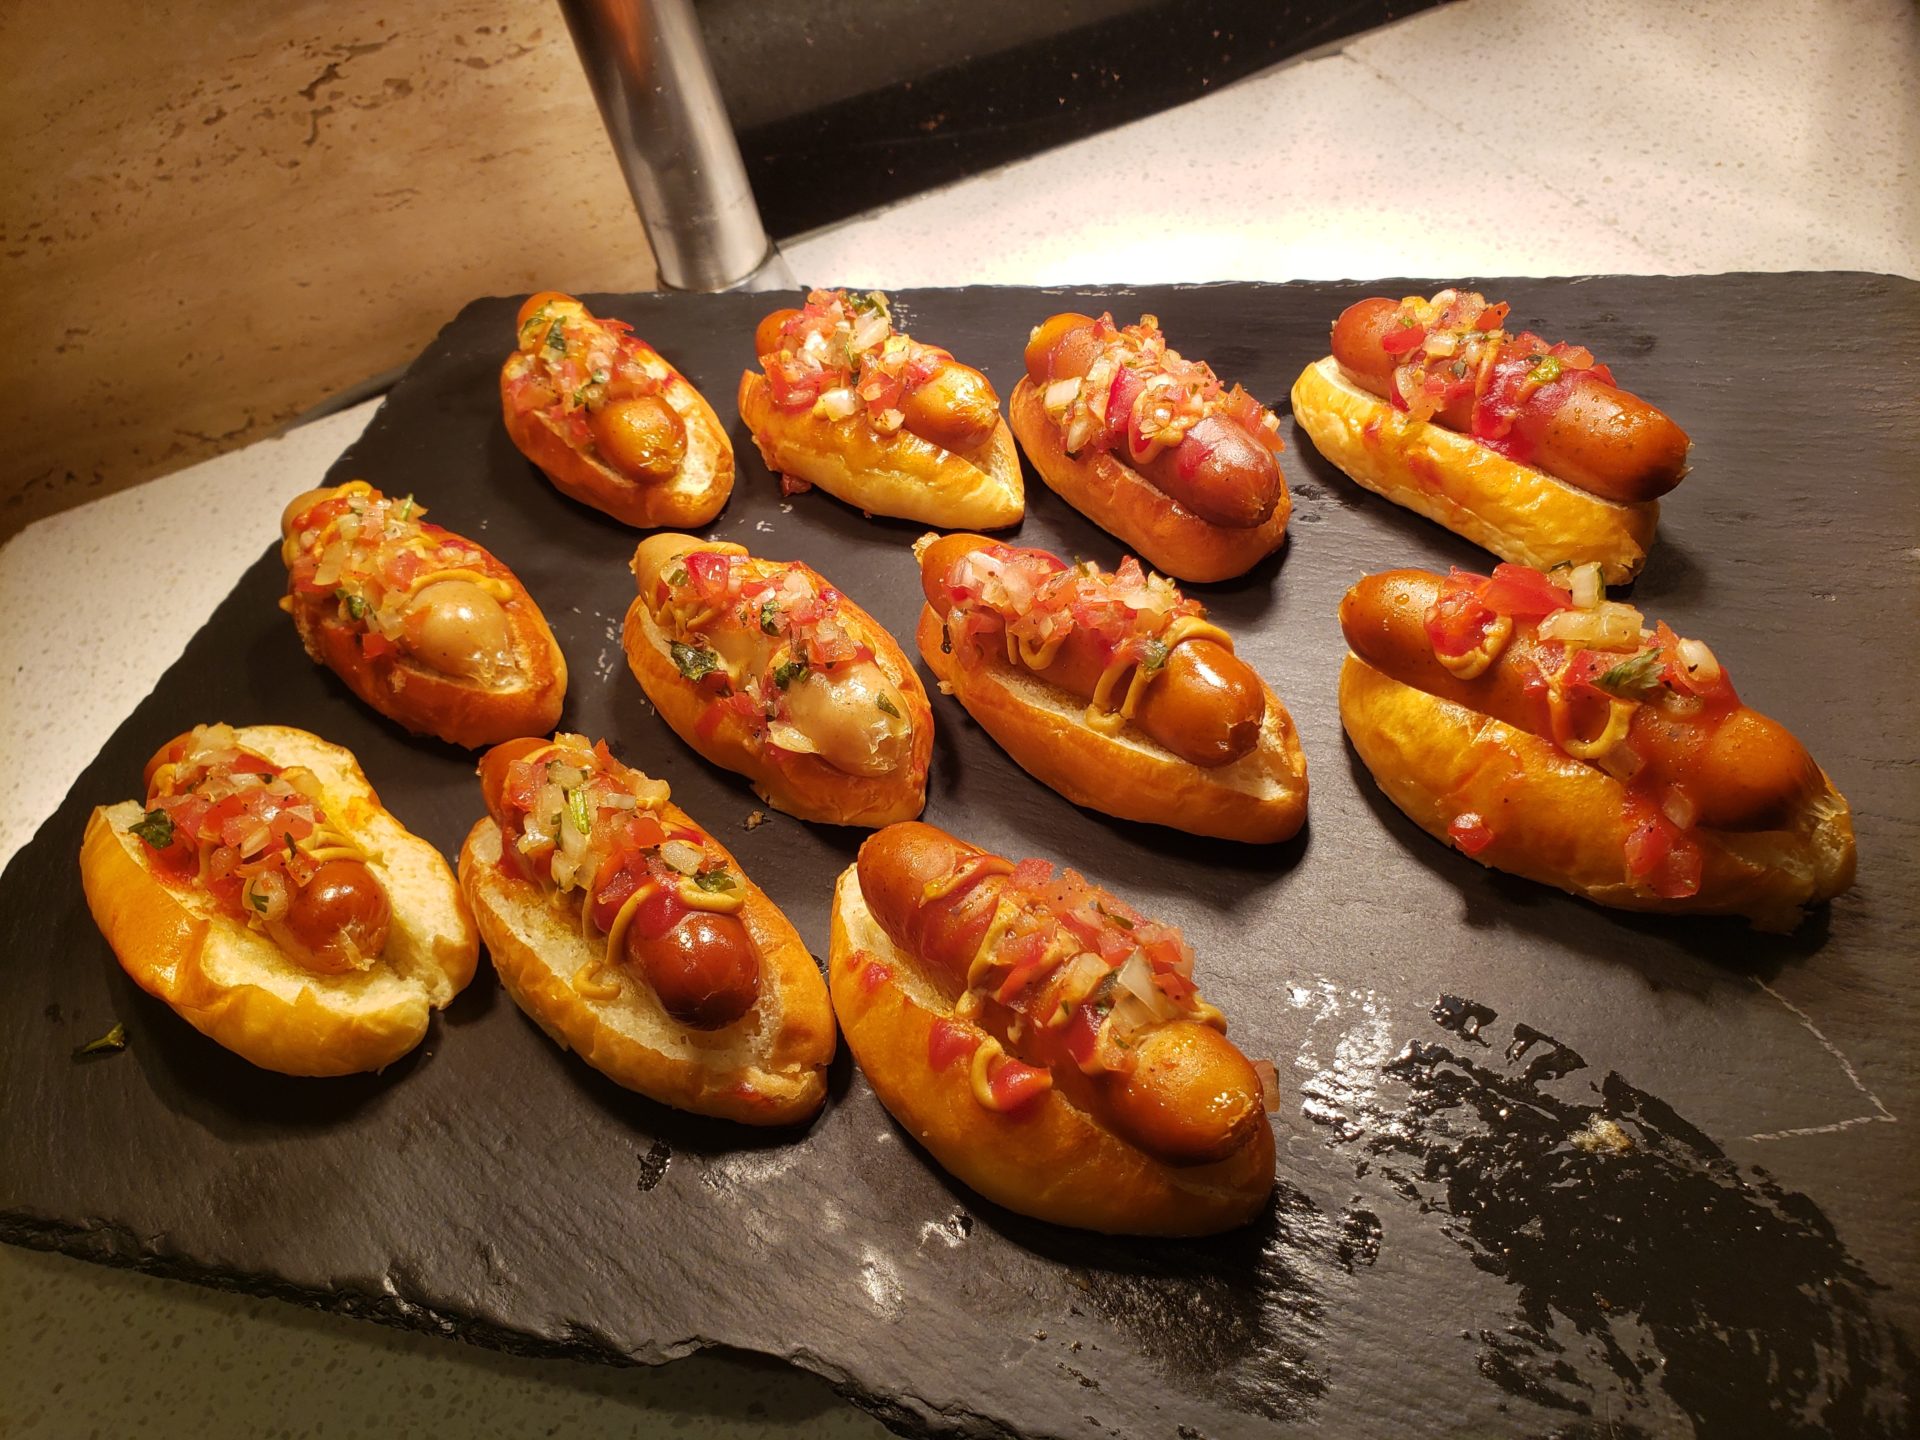 a group of hot dogs on a black tray